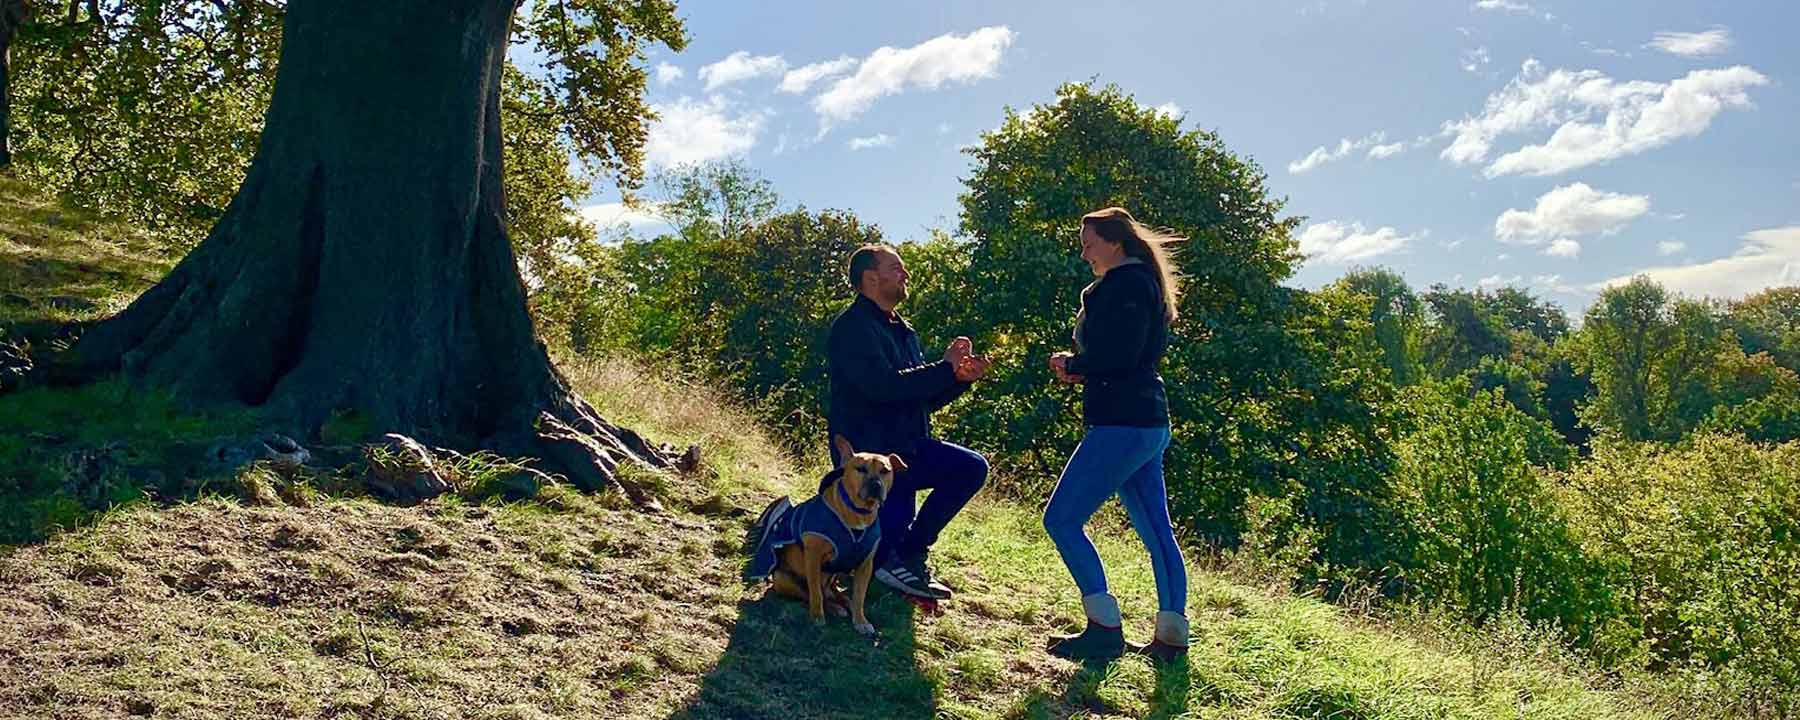 Image showing a man on his knee proposing to a young woman in a woodland setting on a sunny day. There is a dog next to them. Customer reviews for Lebrusan Studio Ethical Jewellery, engagement rings and wedding bands 